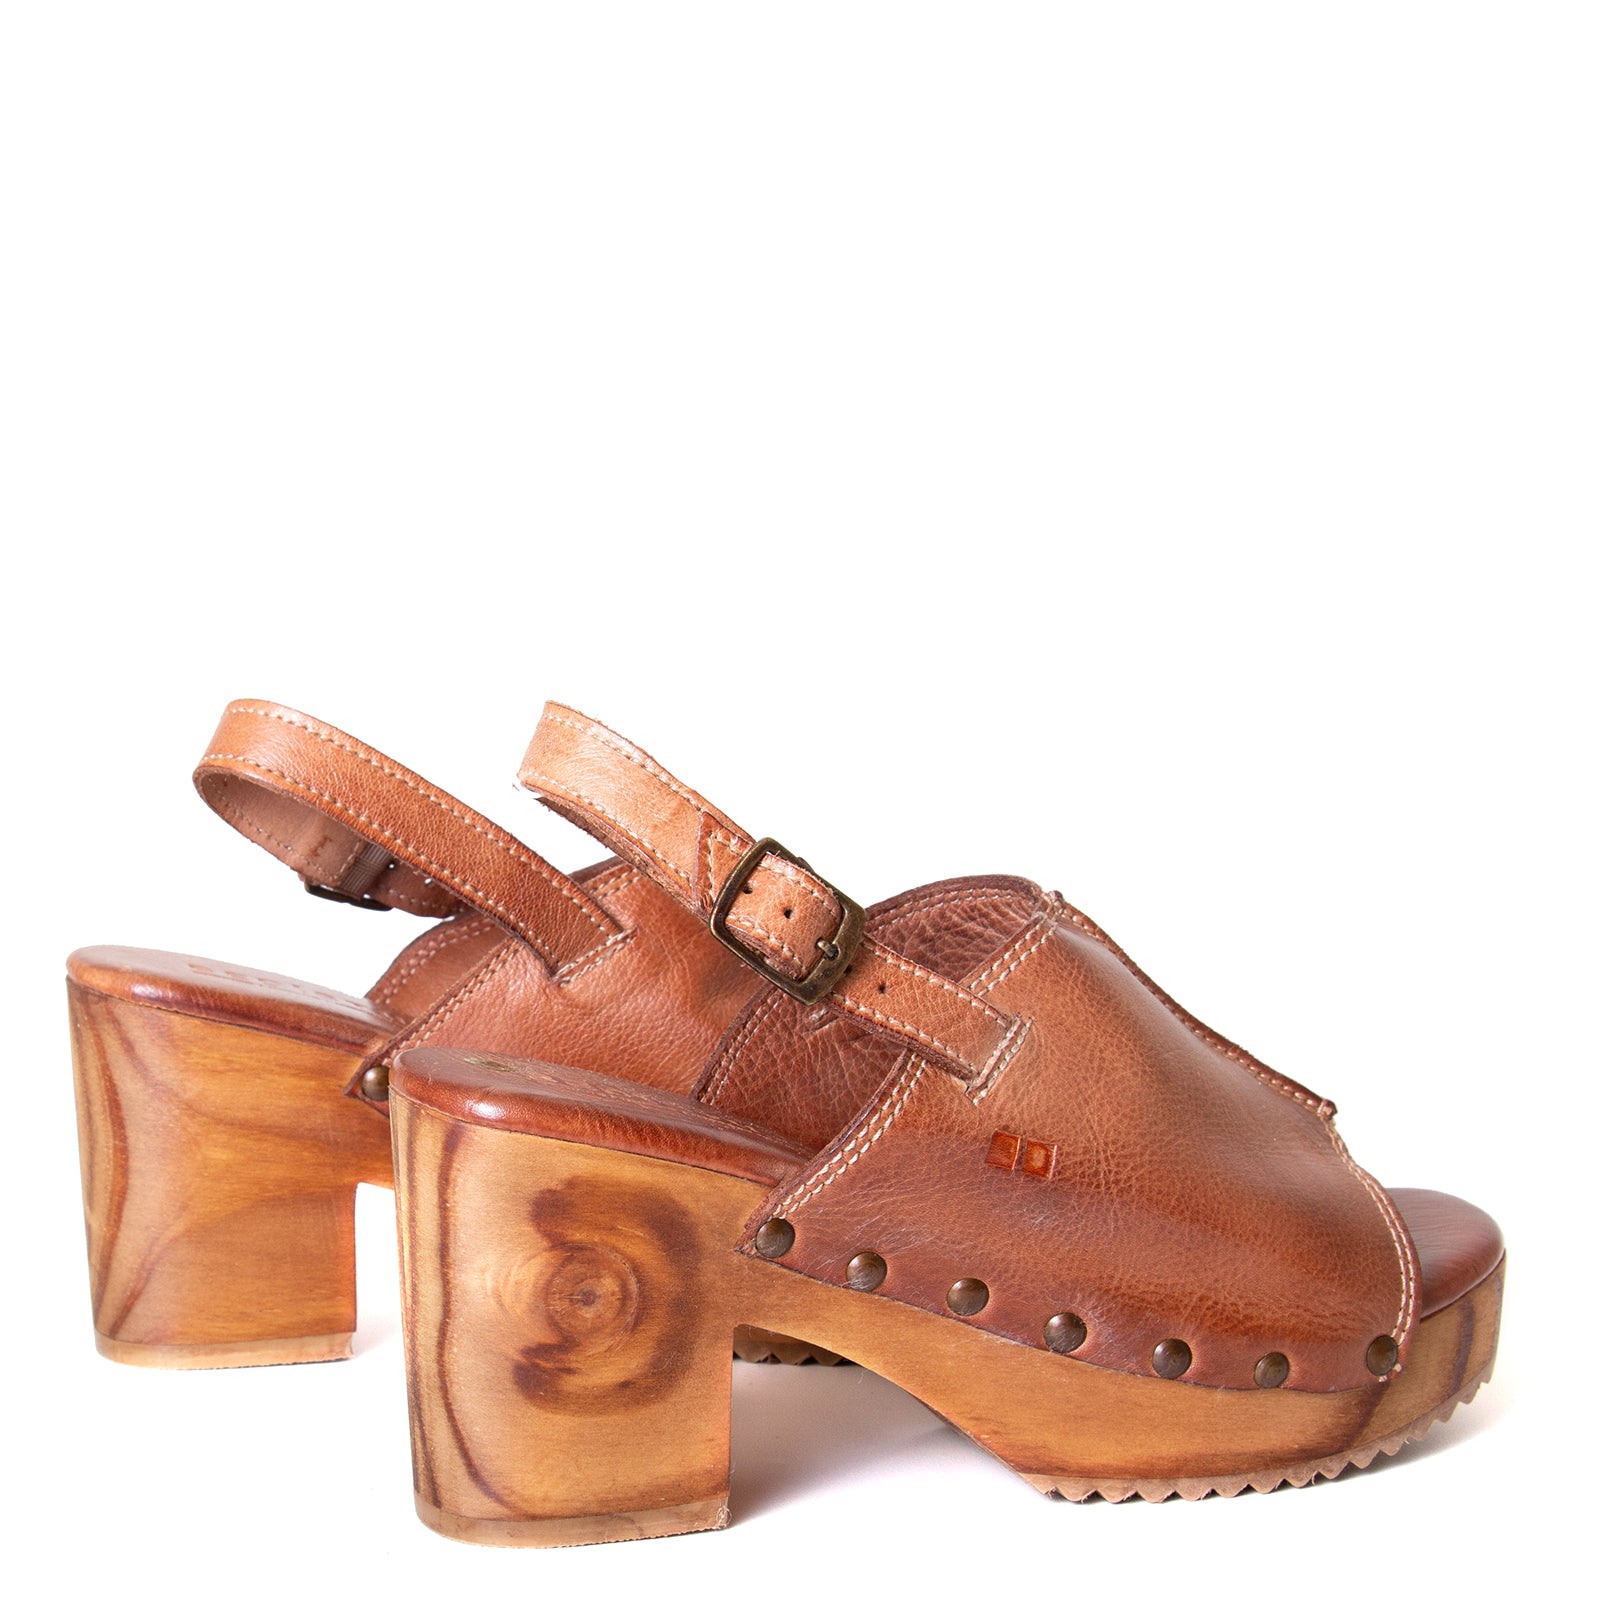 Bed Stu Marie. Women's wooden clog in tan leather, with slingback. Back view, pair.